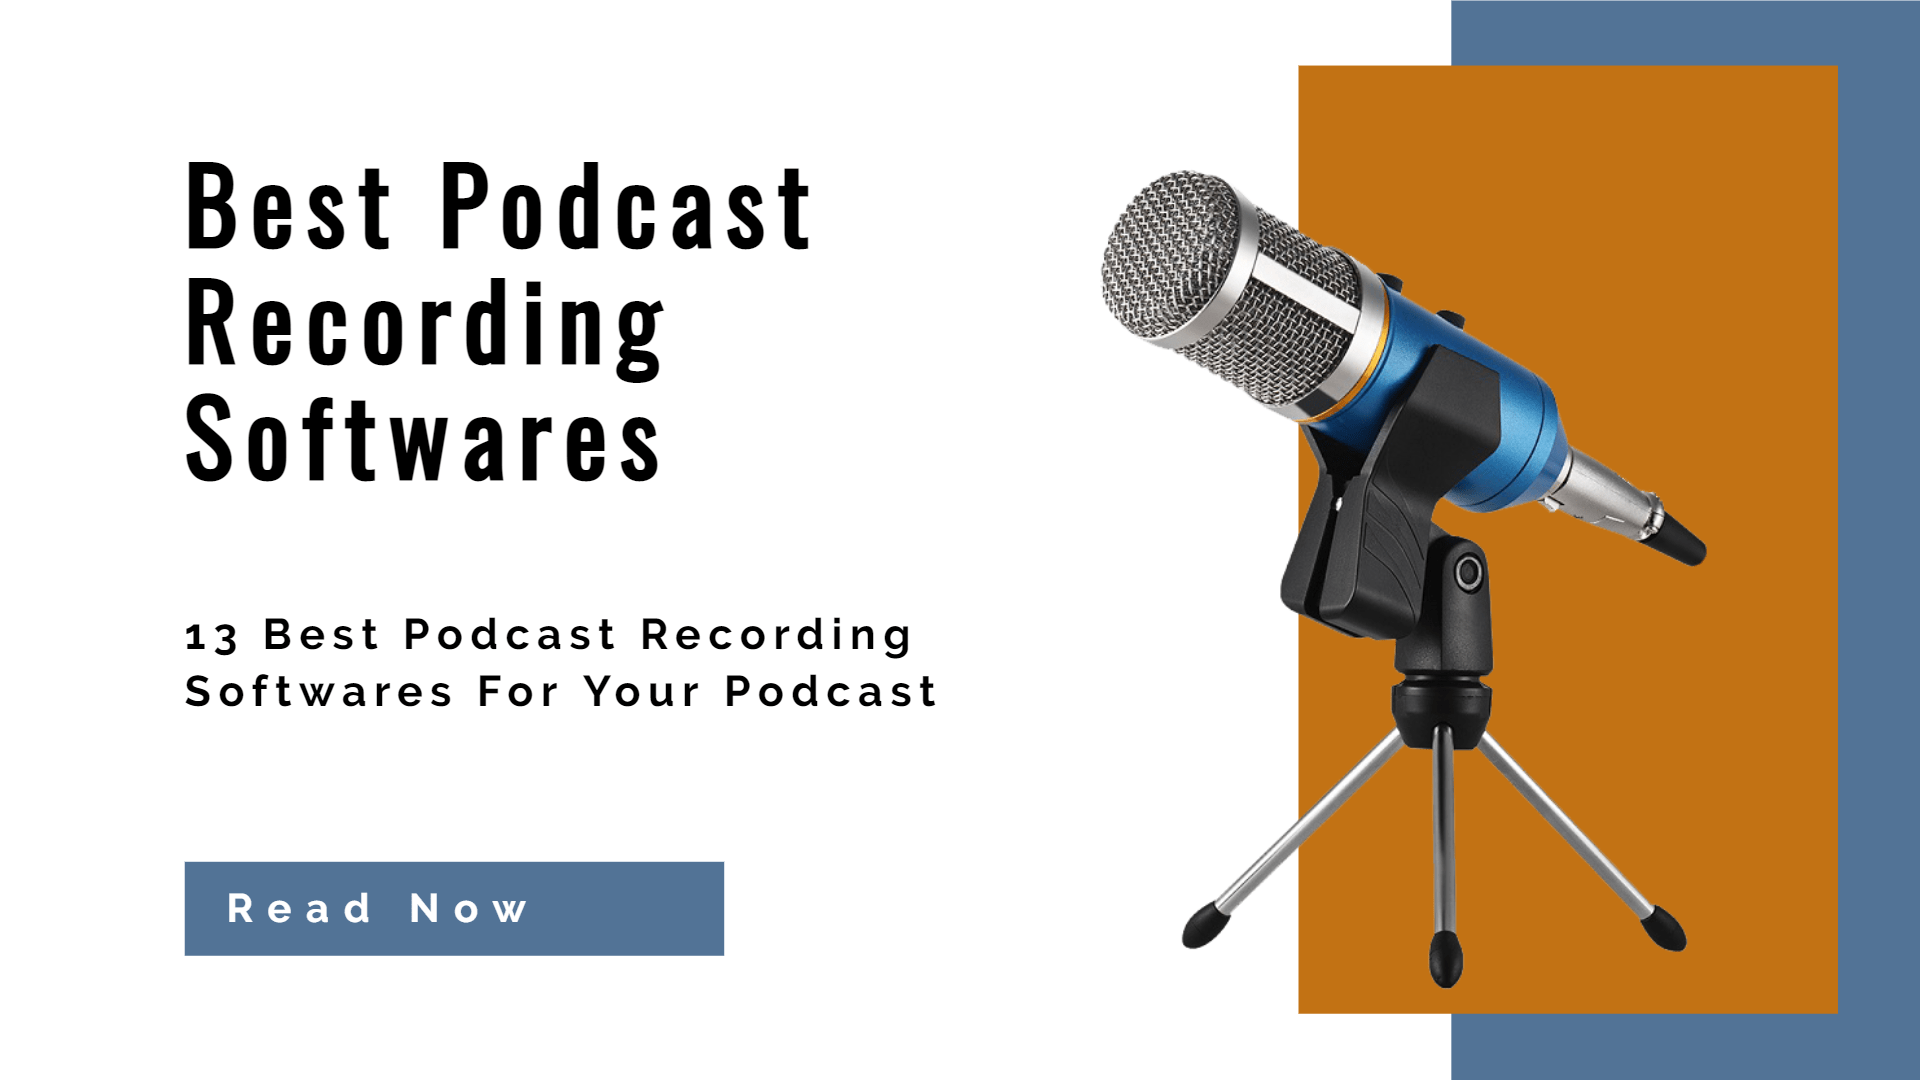 The Best Podcast Recording Software 2021